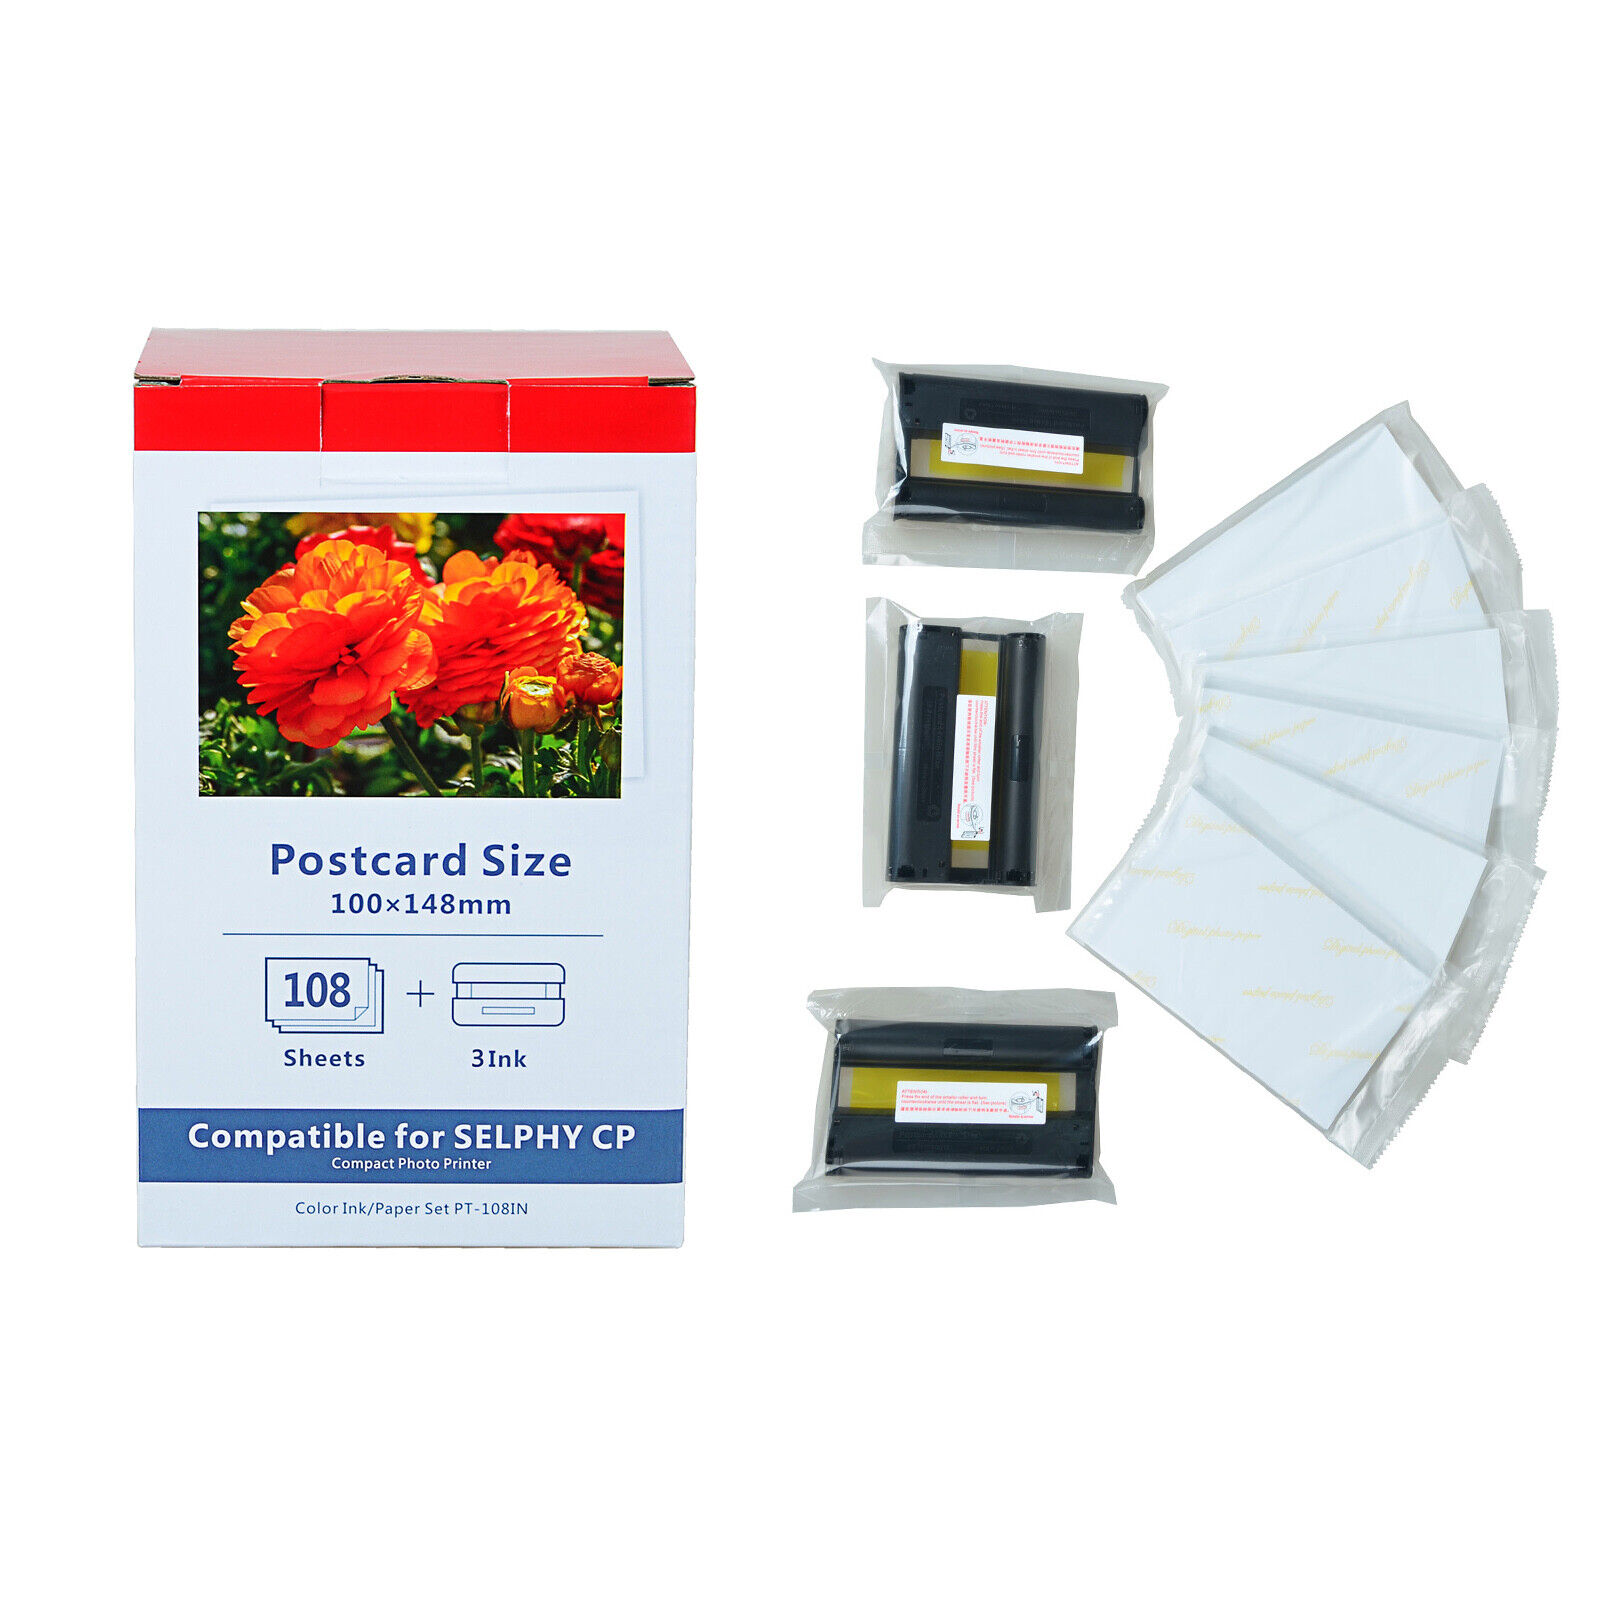 Fits Canon Selphy CP510 CP790 KP-108IN Color Inks 3115B001 + 4X6 Photo Paper Set